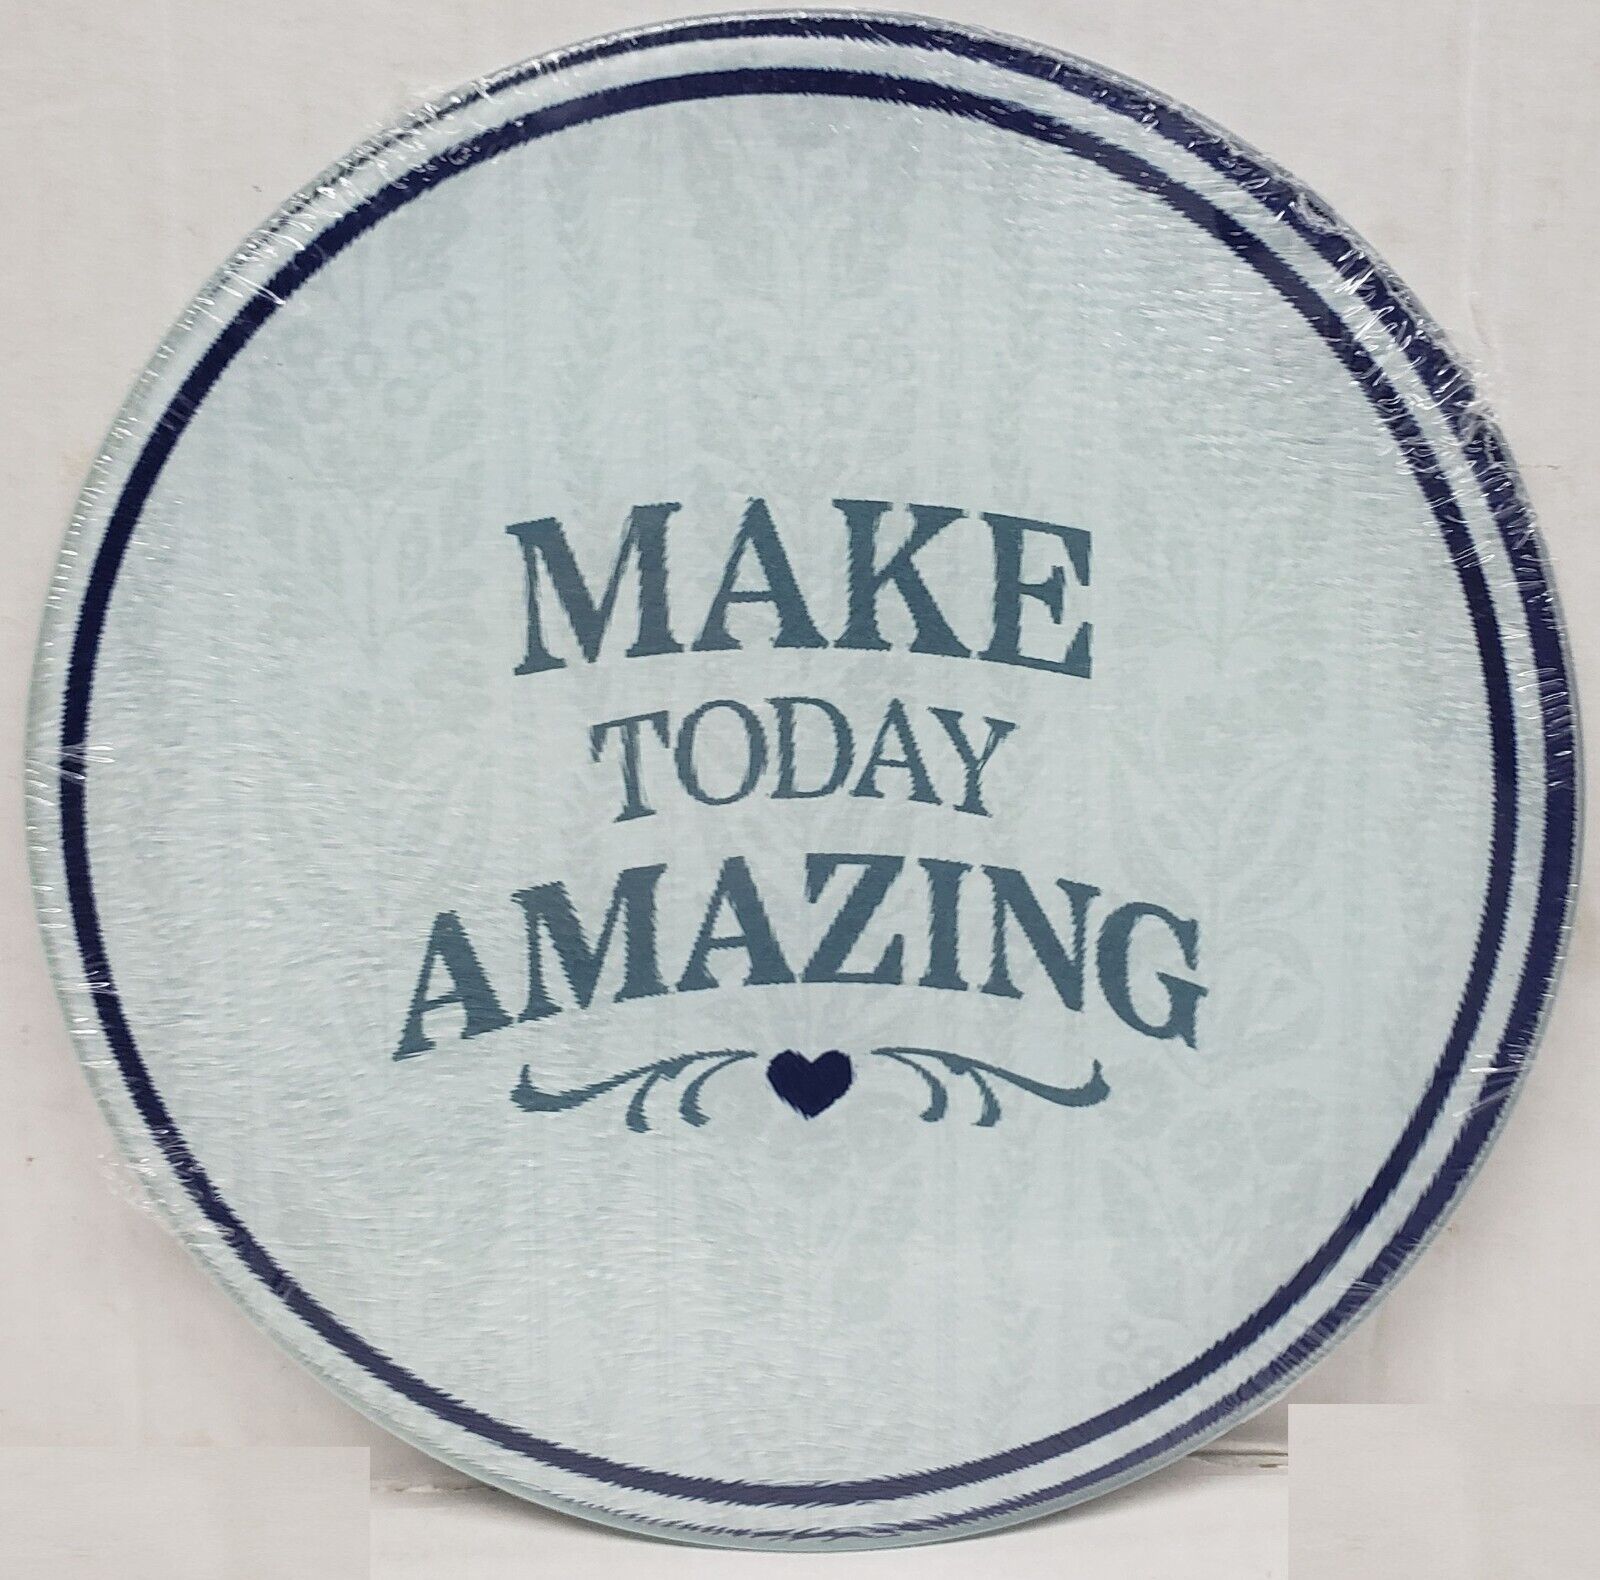 Primary image for Round Glass Cutting Board/Trivet, app 8", MAKE TODAY AMAZING, GR